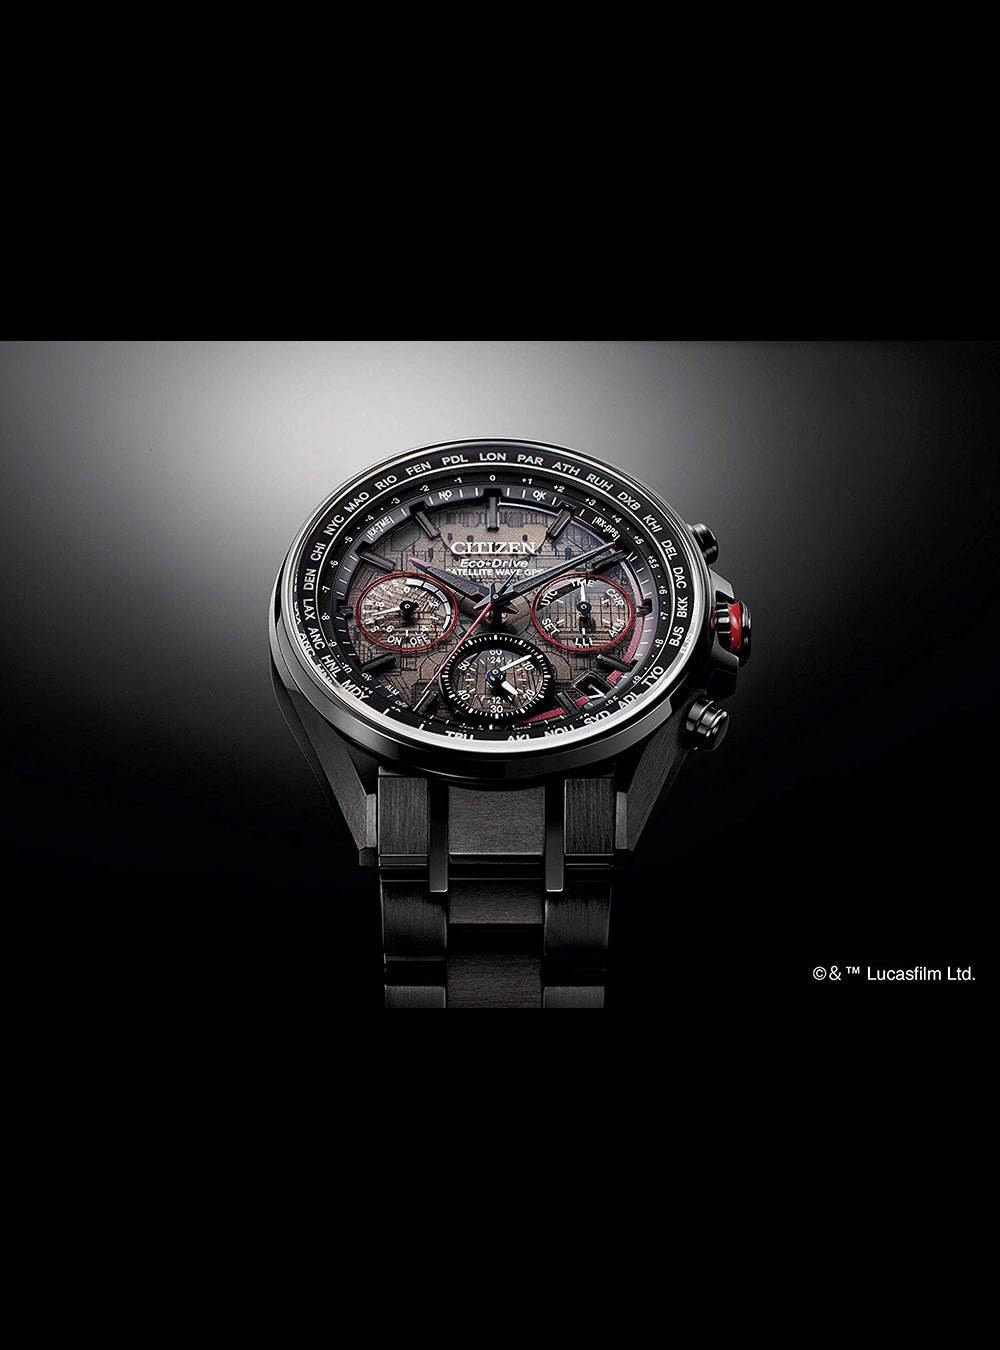 CITIZEN ATTESA F950 LIMITED EDITION DARTH VADER MODEL LIMITED 1500  CC4006-61E MADE IN JAPAN JDM (Japanese Domestic Market)